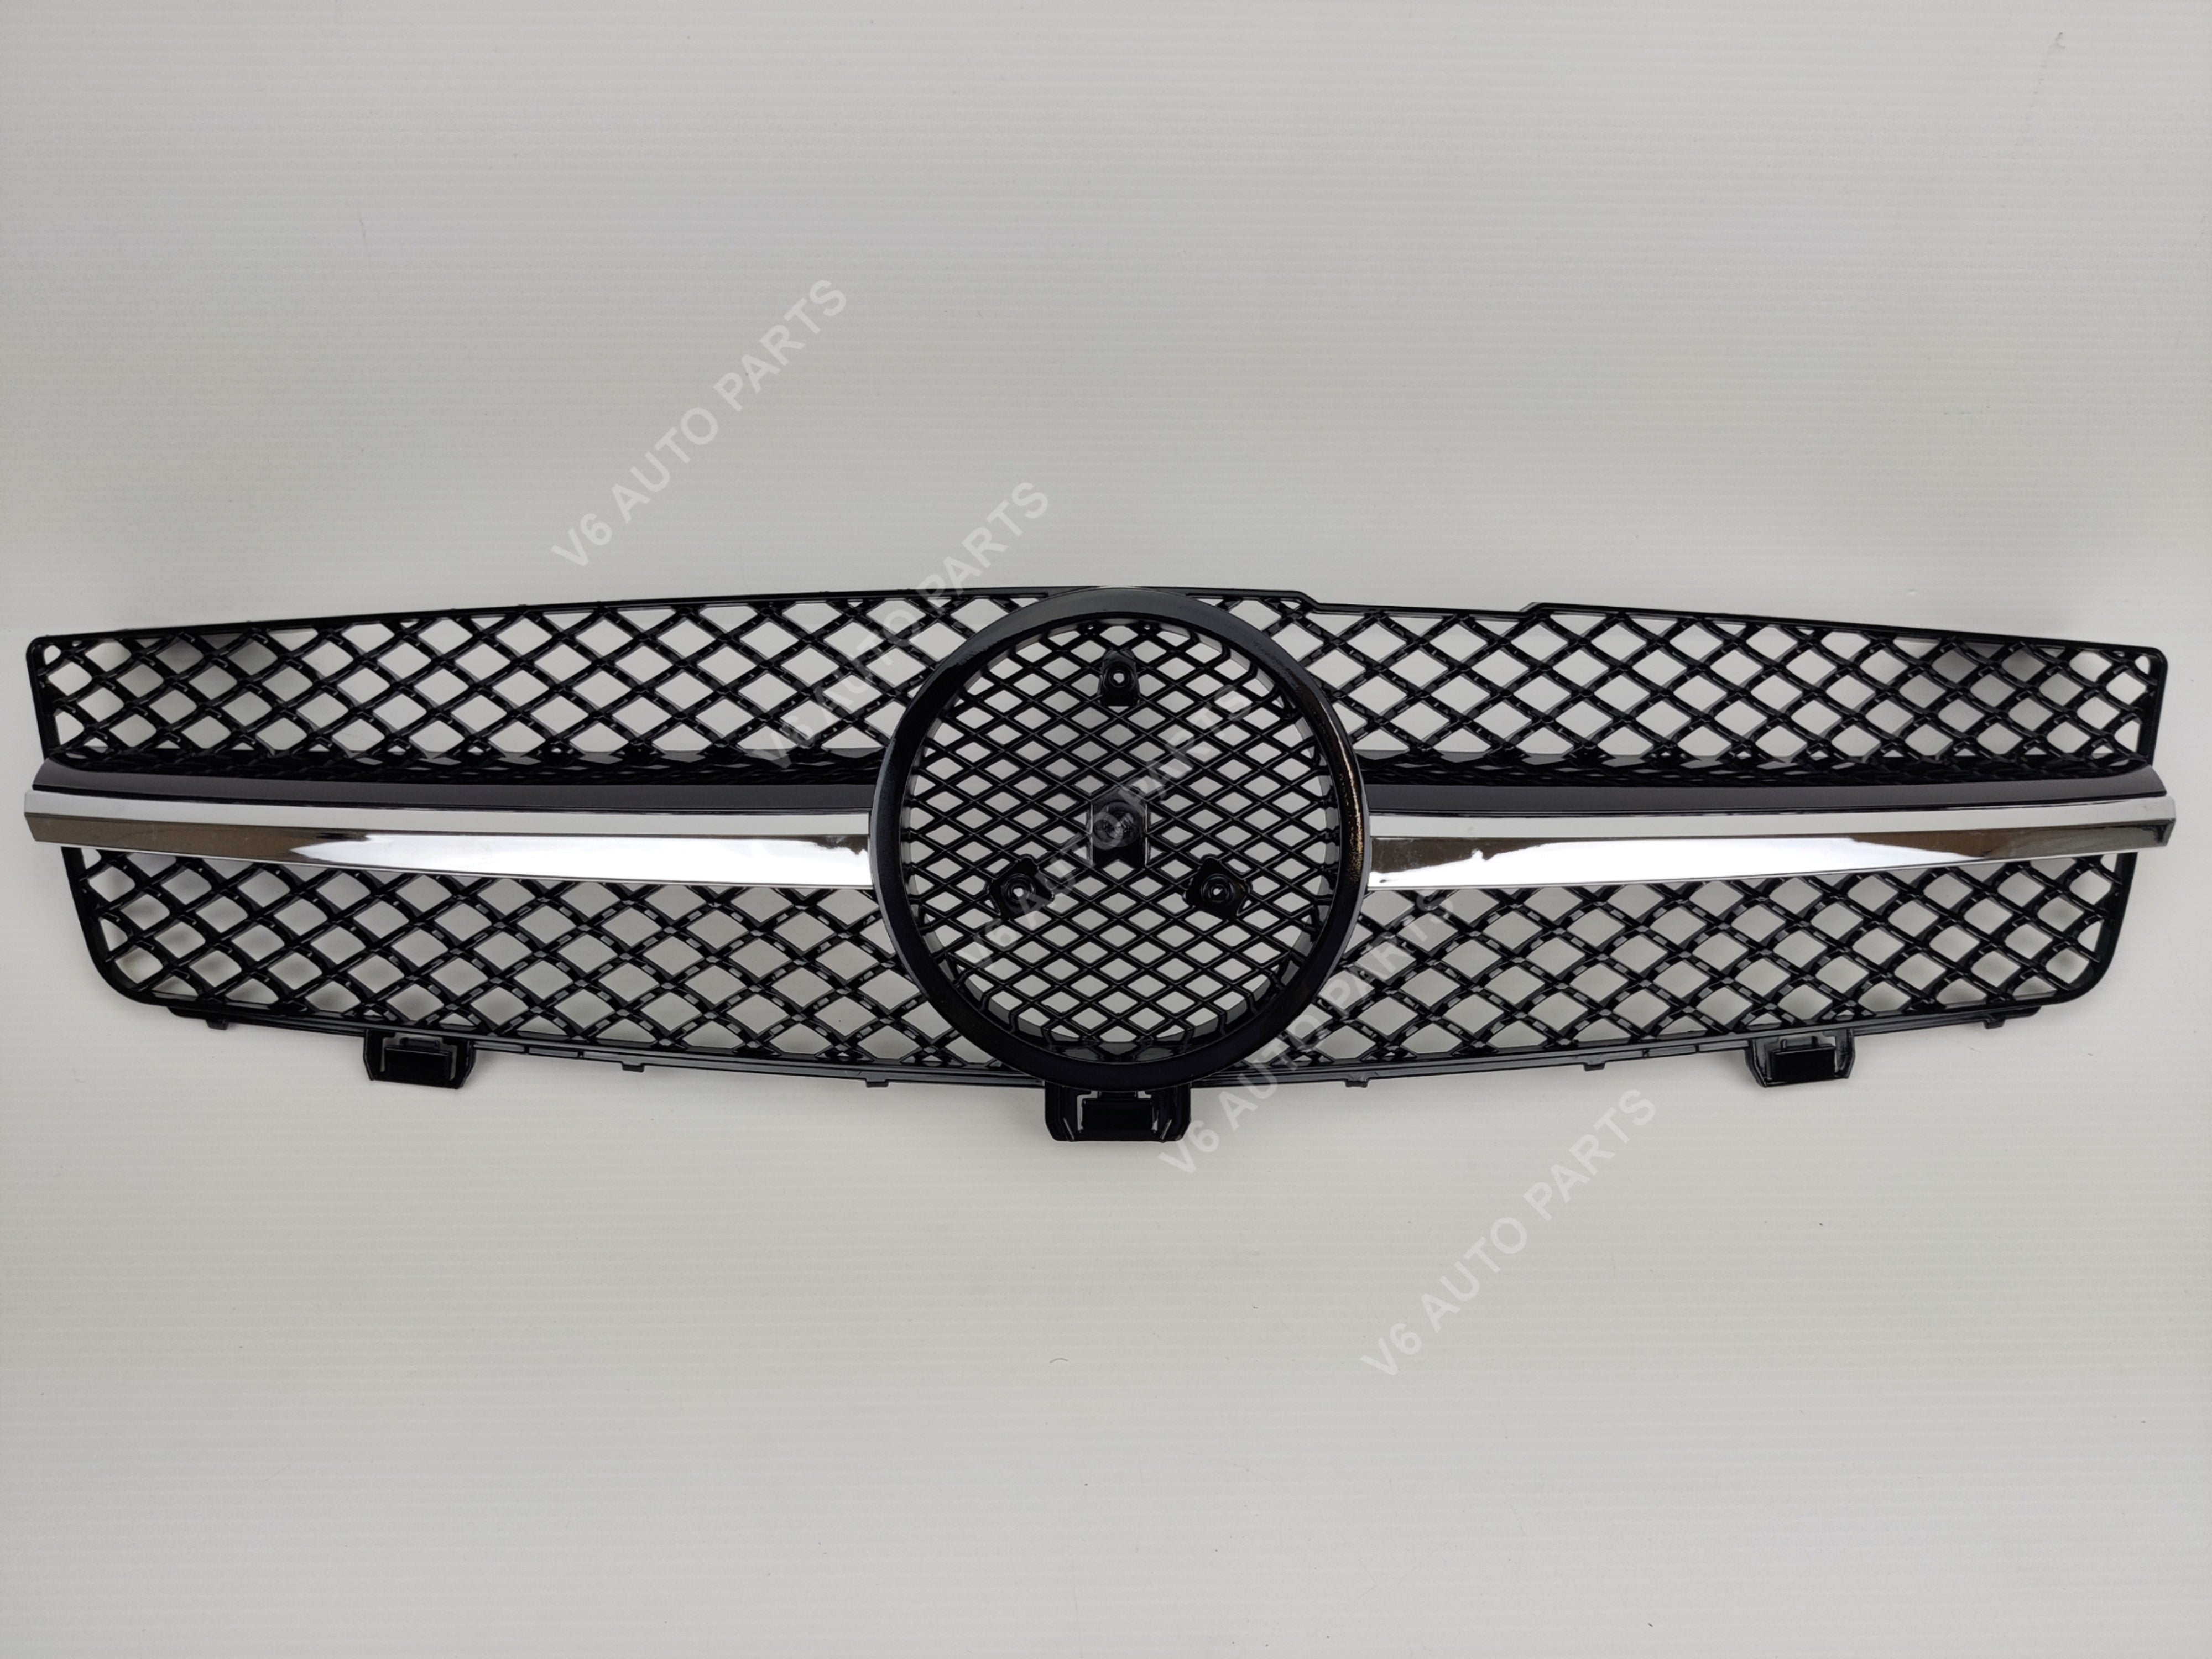 For Mercedes CLS-Class C219 CLS63 CLS300 Front Radiator Grille Facelift 2008-10